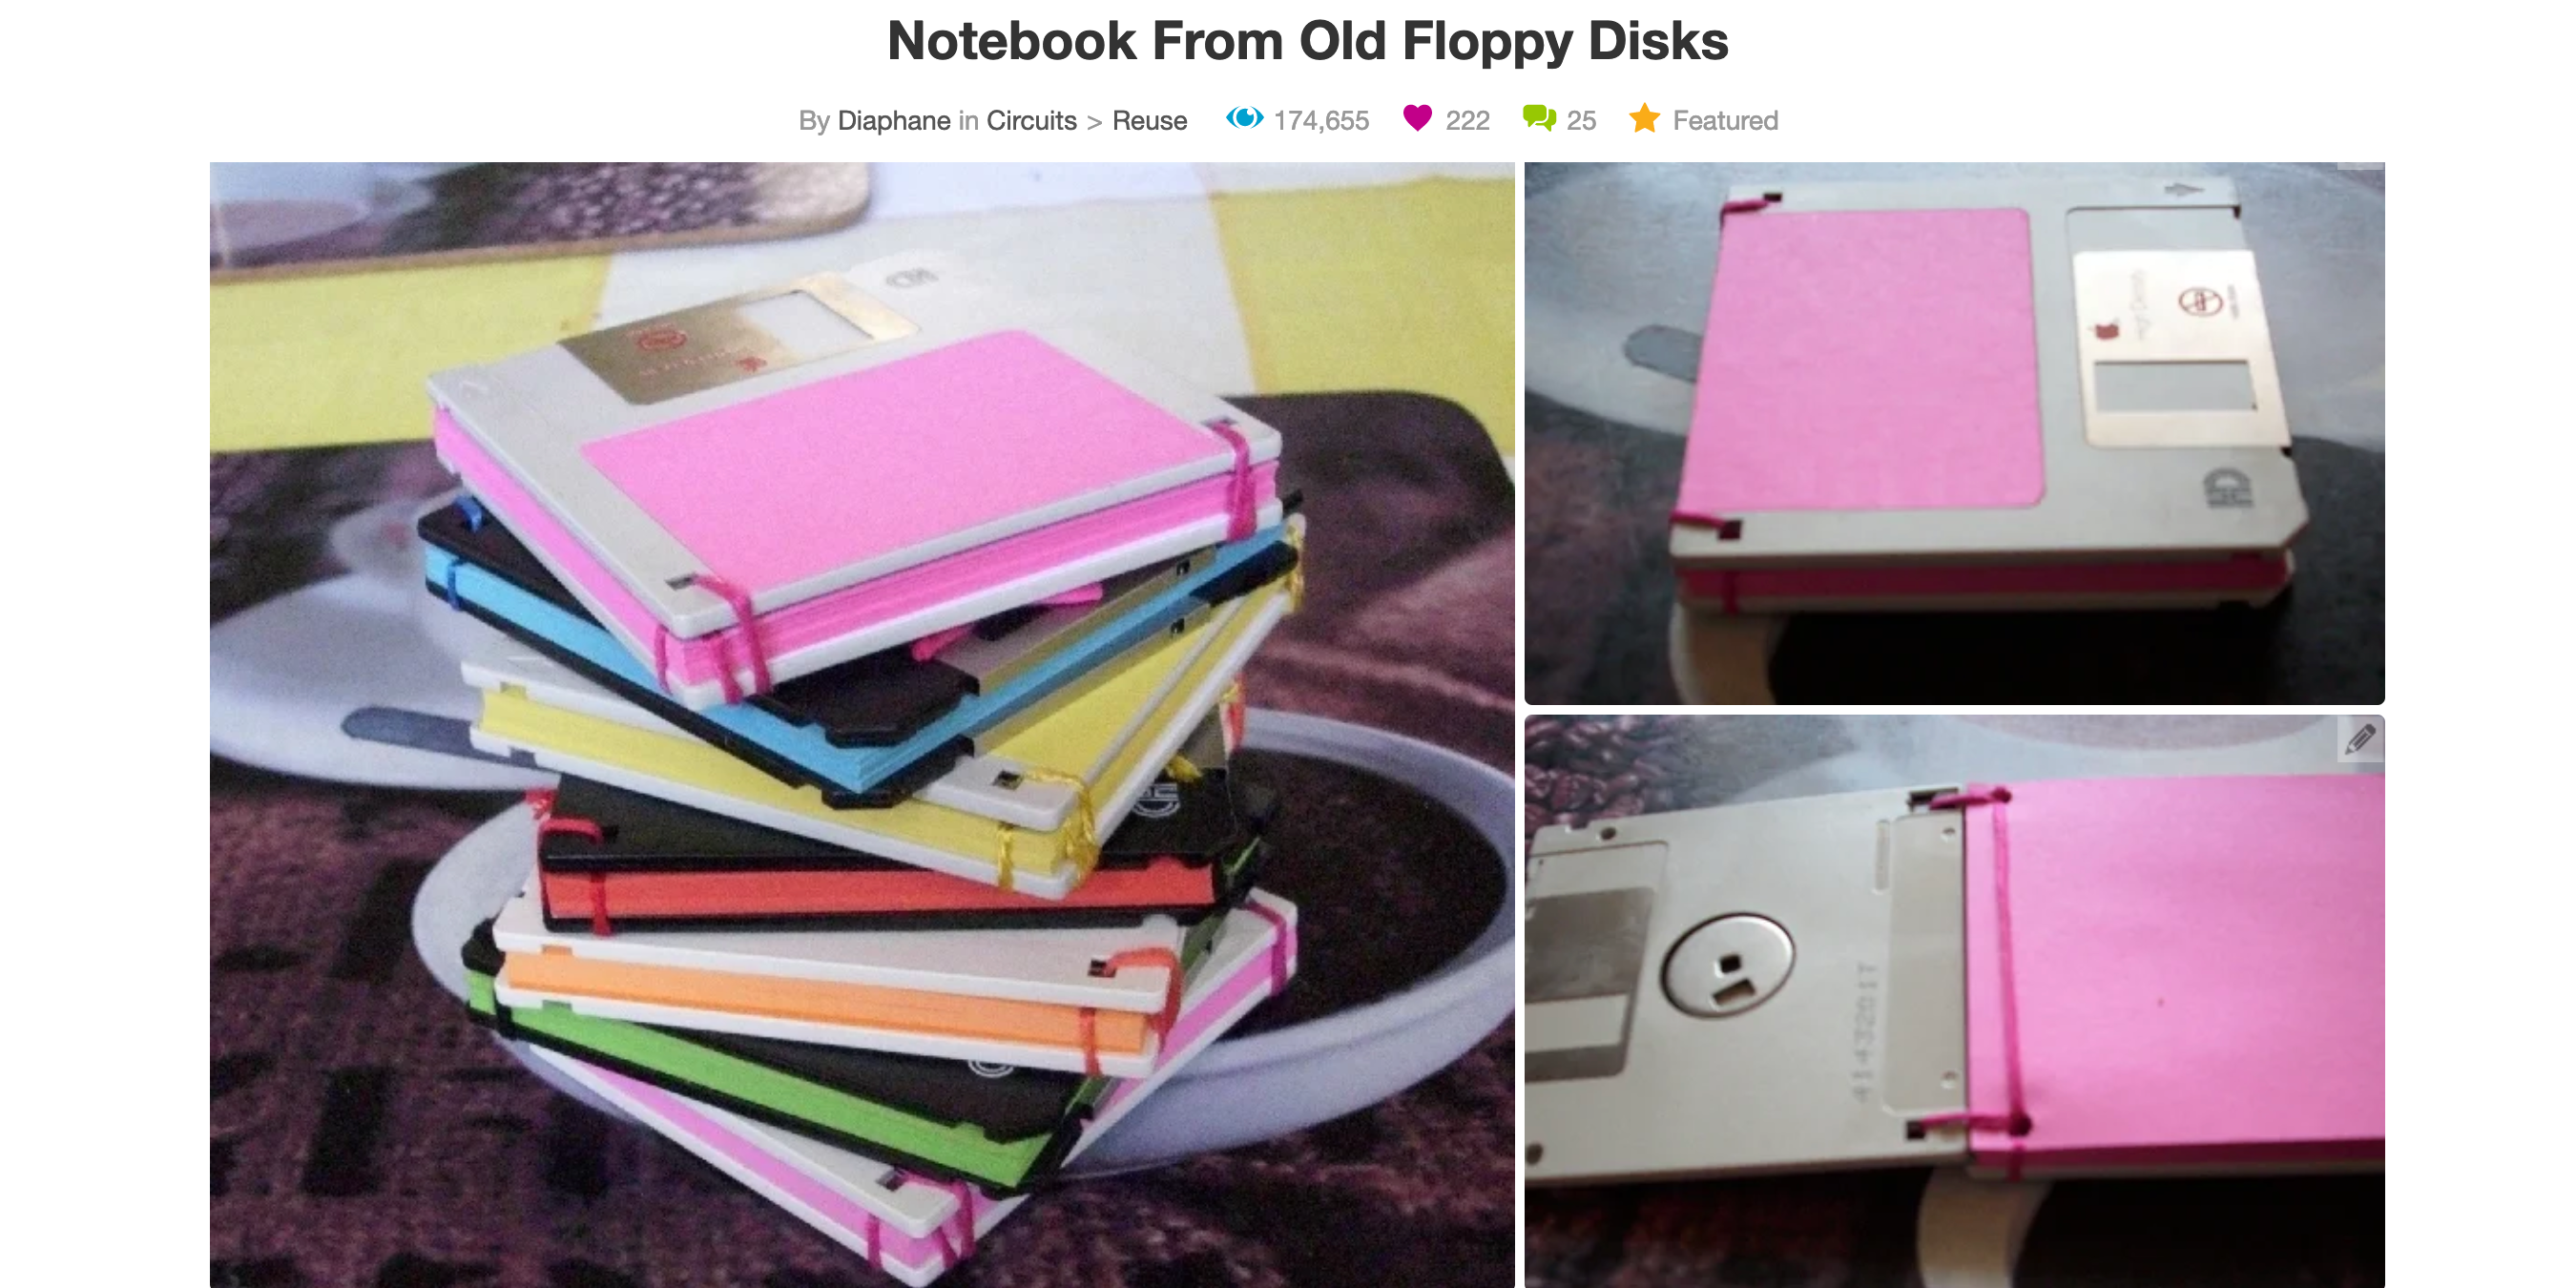 Three pictures of a DIY floppy disk from three different angles